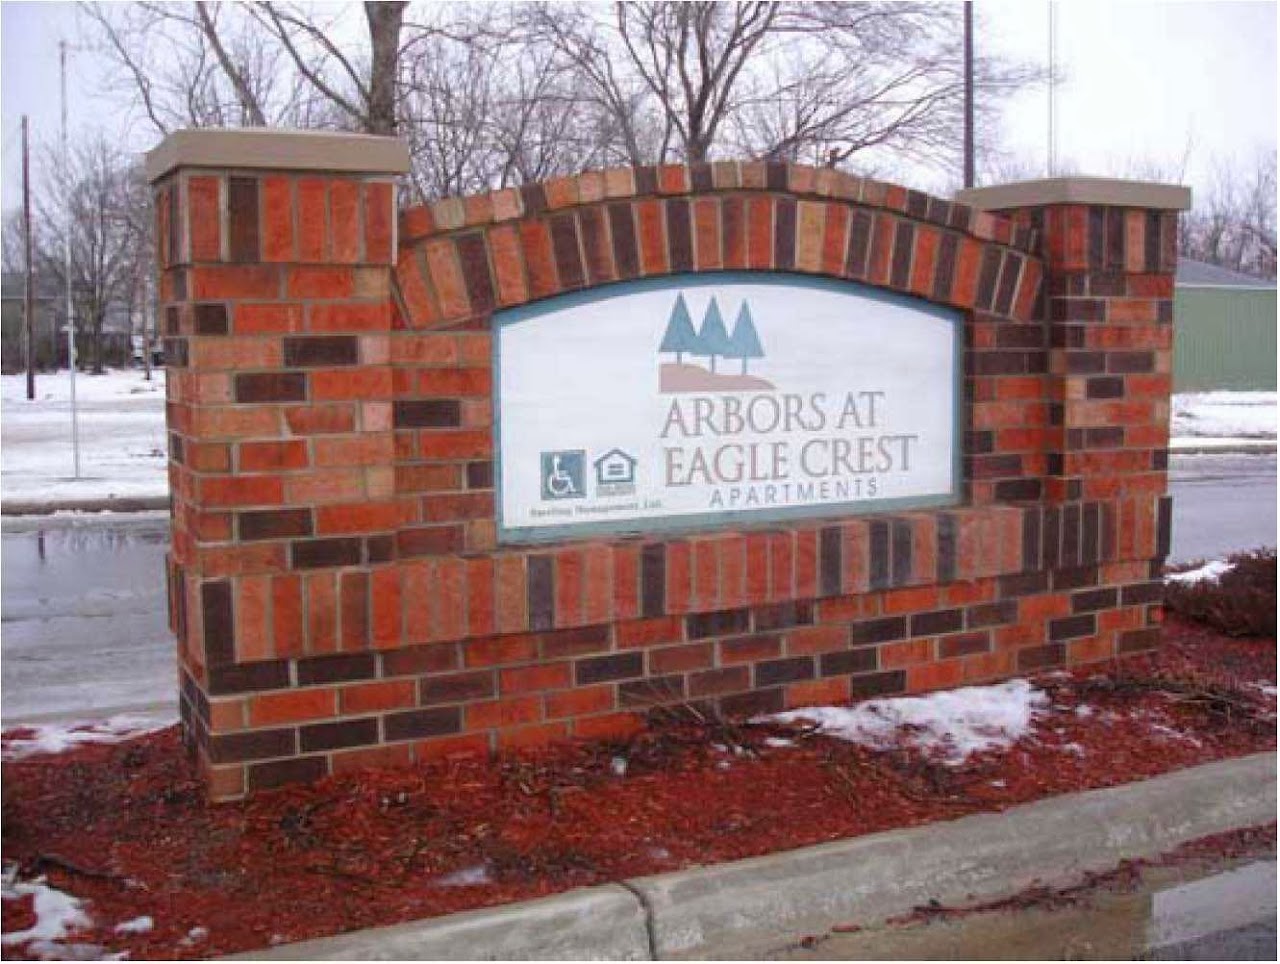 Photo of ARBORS AT EAGLE CREST II. Affordable housing located at 5100 N EAGLE CRST MT PLEASANT, MI 48858